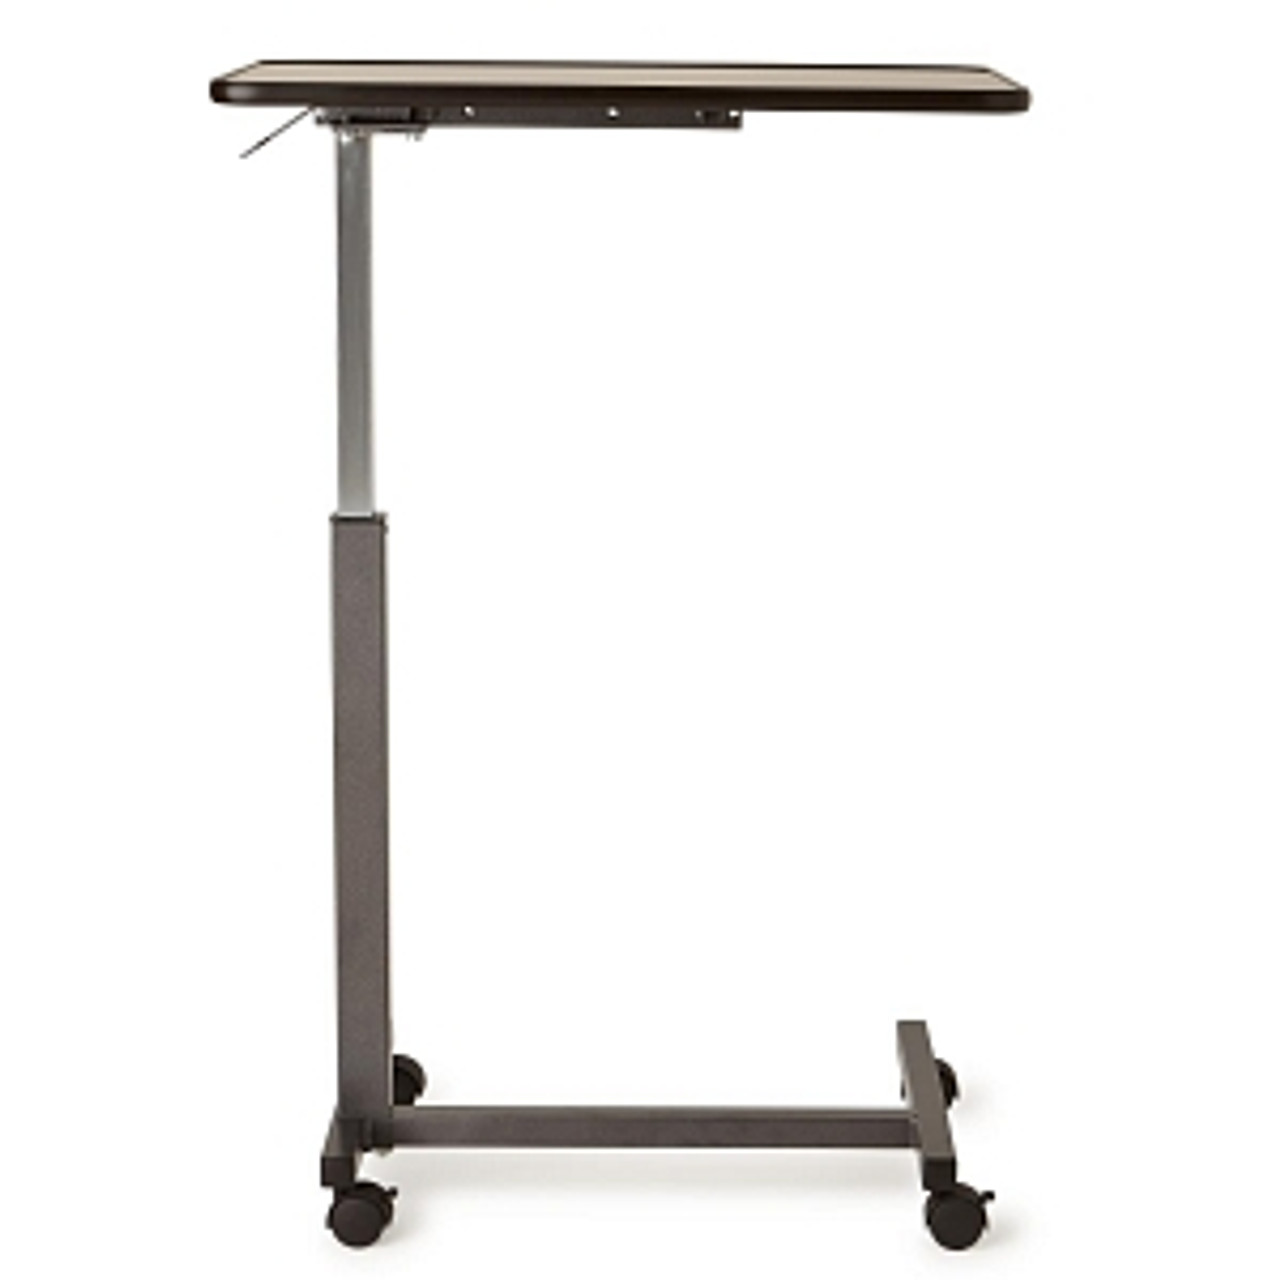 Overbed table designed for medical use and activities involving hemi, super-hemi, pediatric-height wheelchairs, and low beds
Contact your Medline sales representative for more economy options